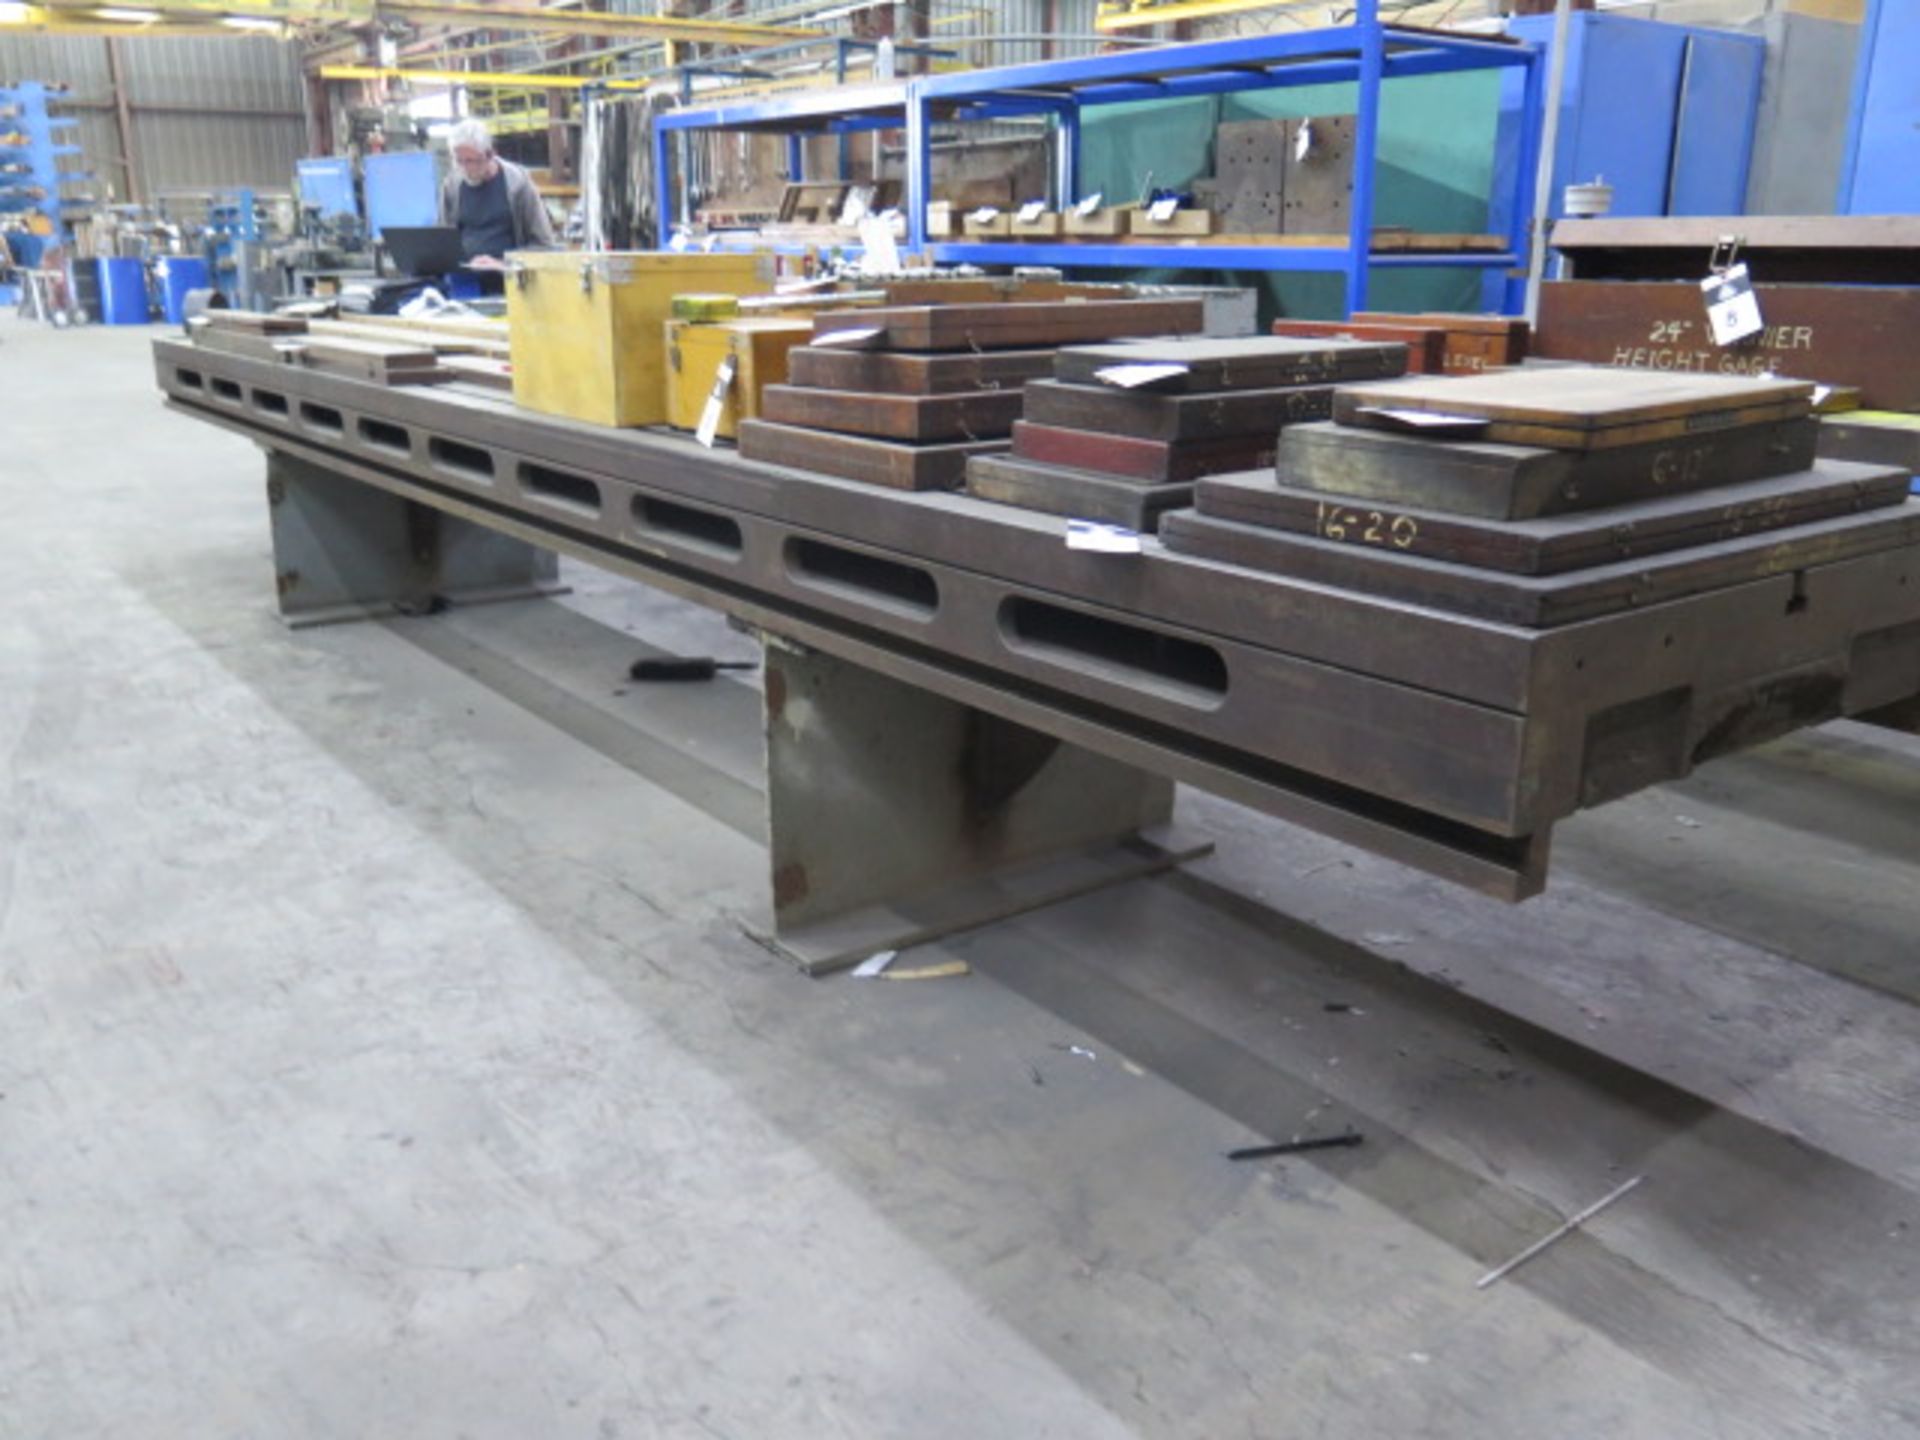 35" x 220" T-Slot Table (SOLD AS-IS - NO WARRANTY)